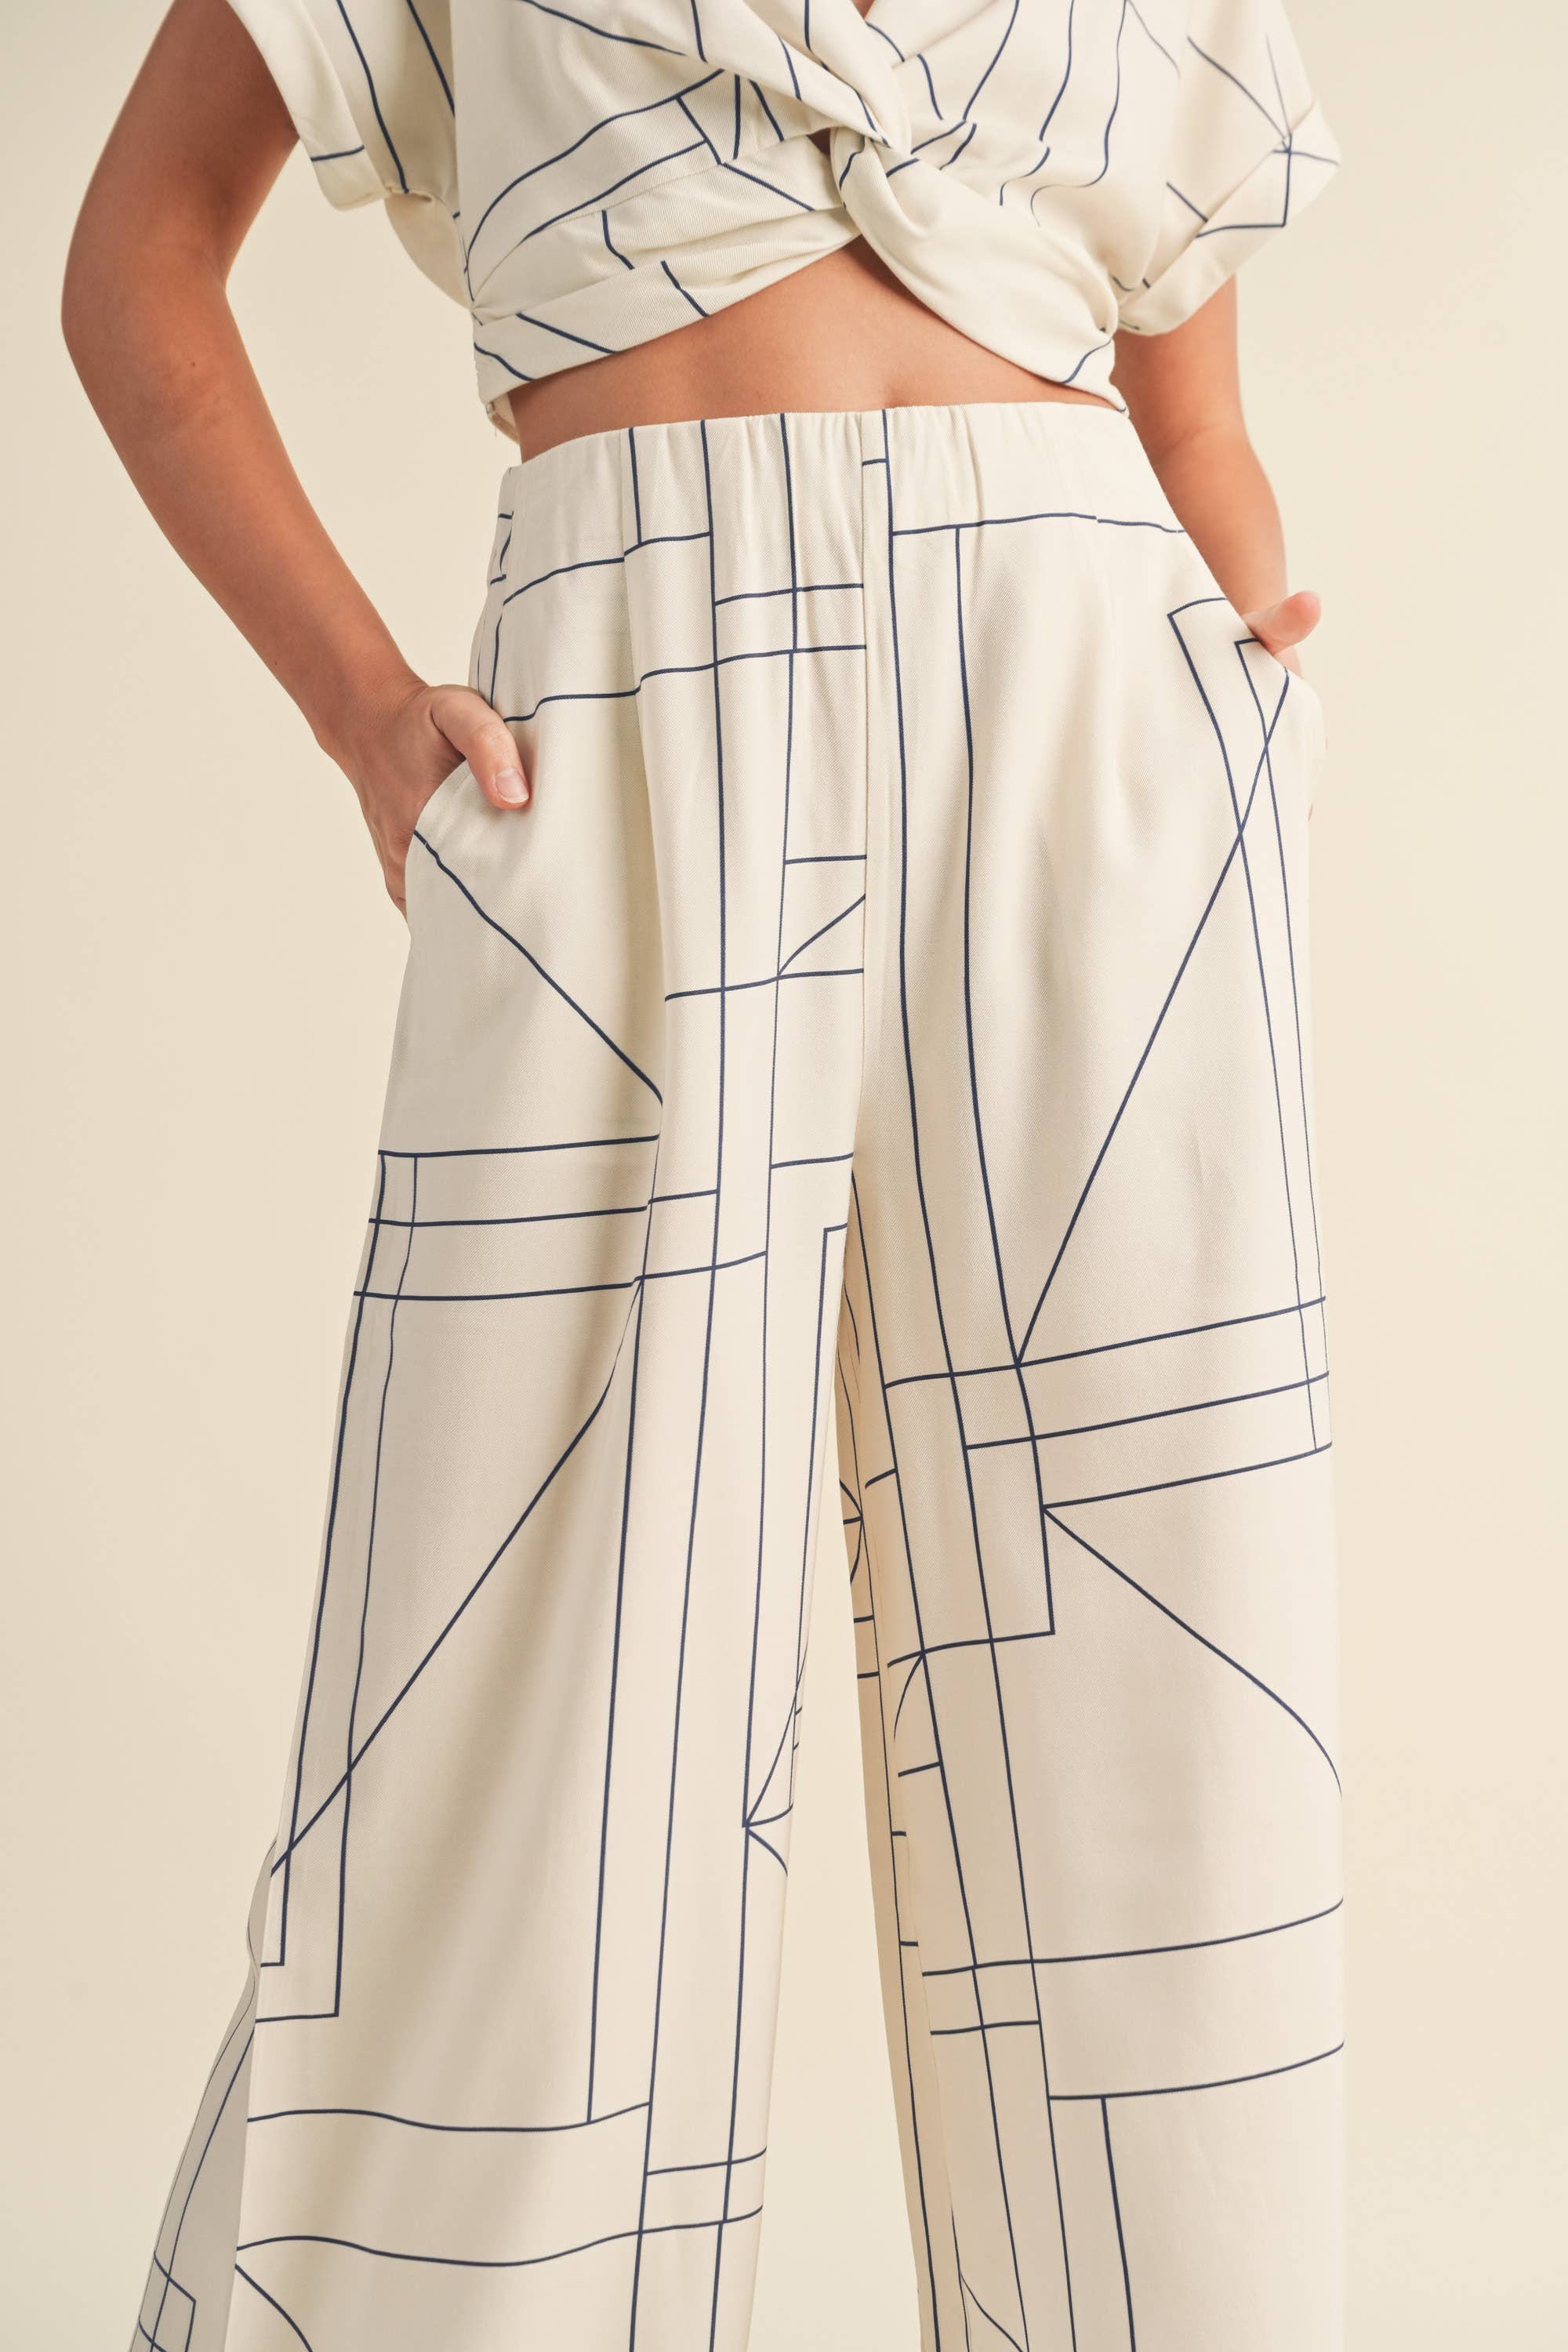 P3446ST MULTI GRID PATTERN WIDE LEG PANTS - Out of the Blue